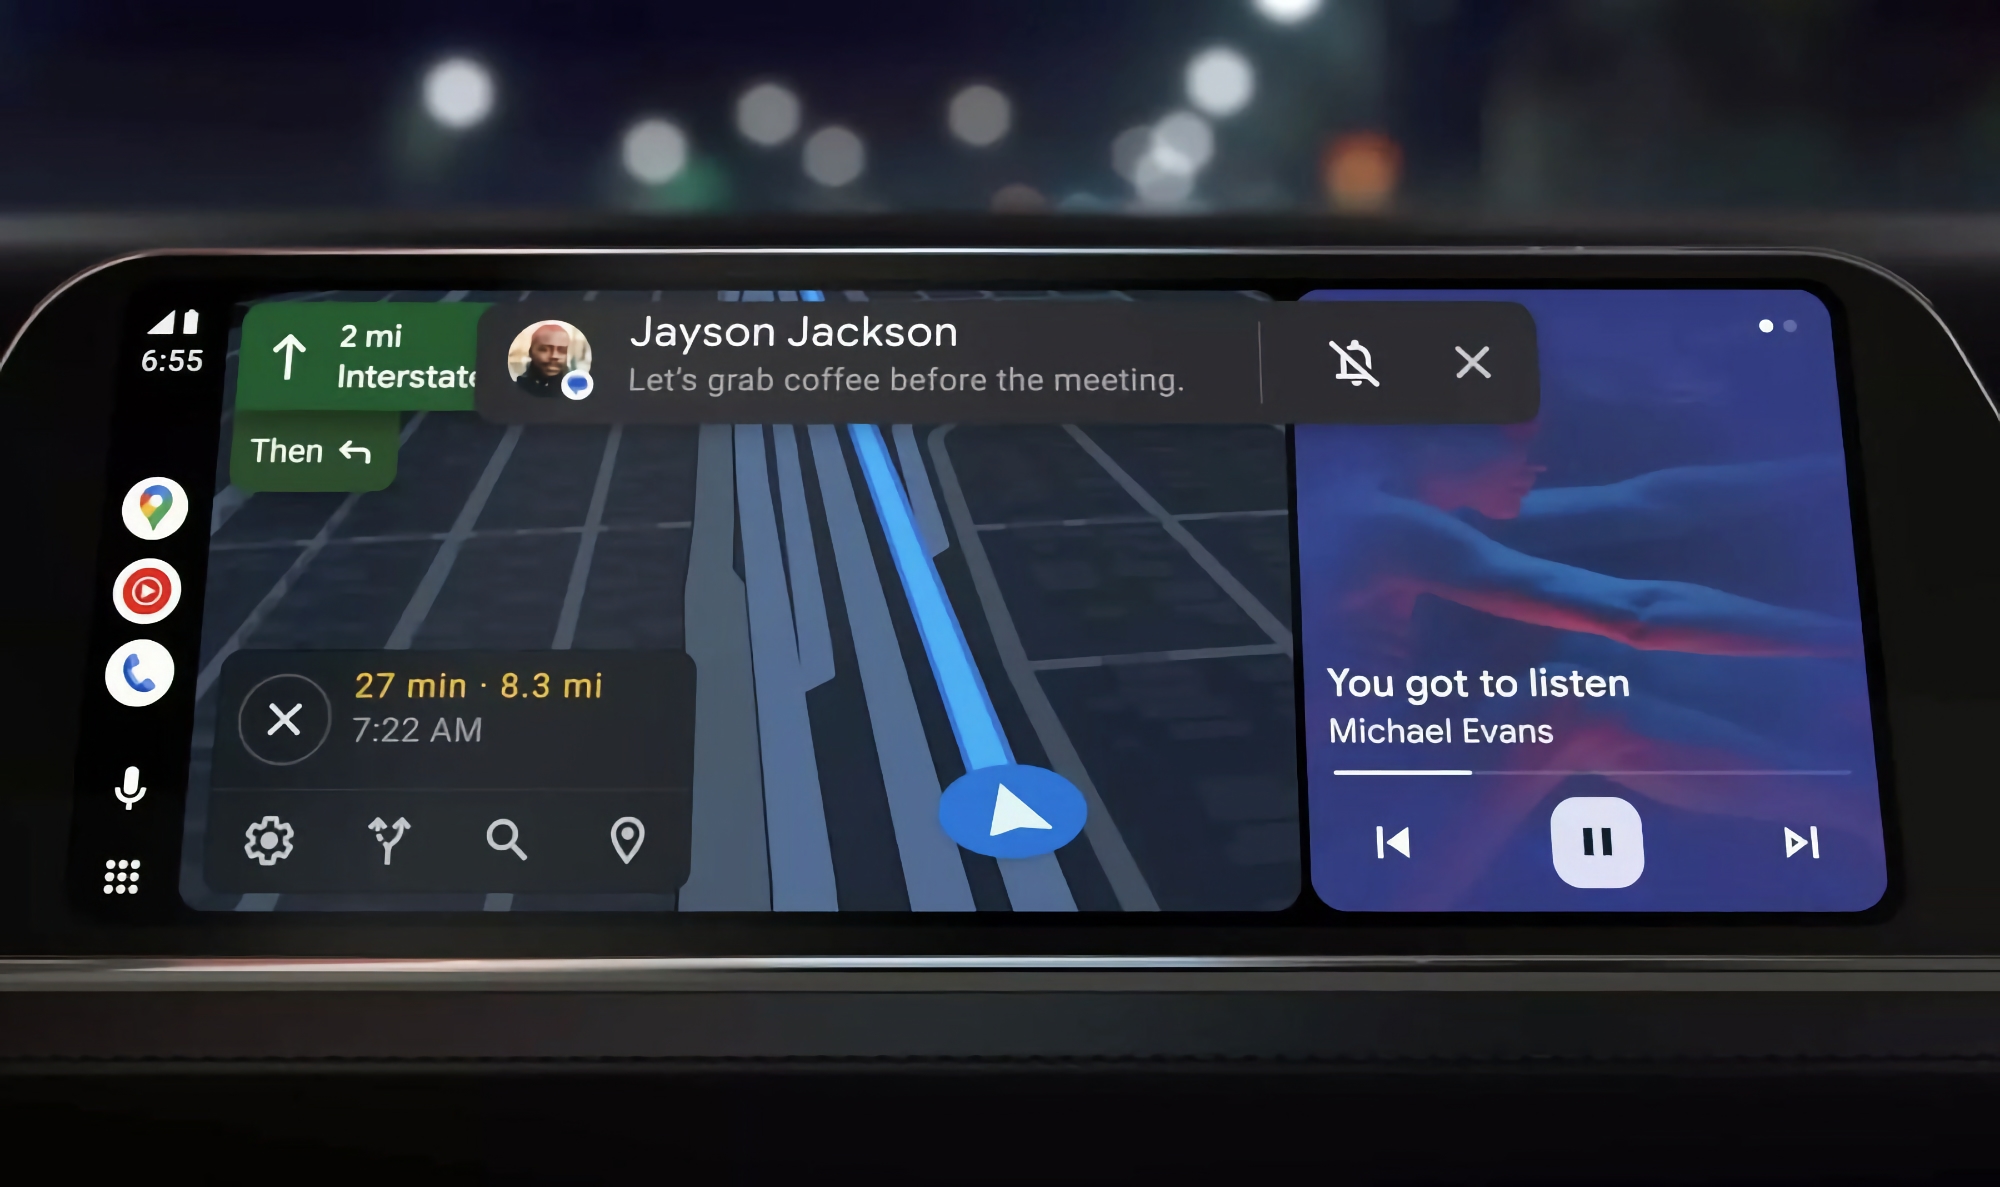 Android Auto is getting new AI feature to summarize messages - SamMobile